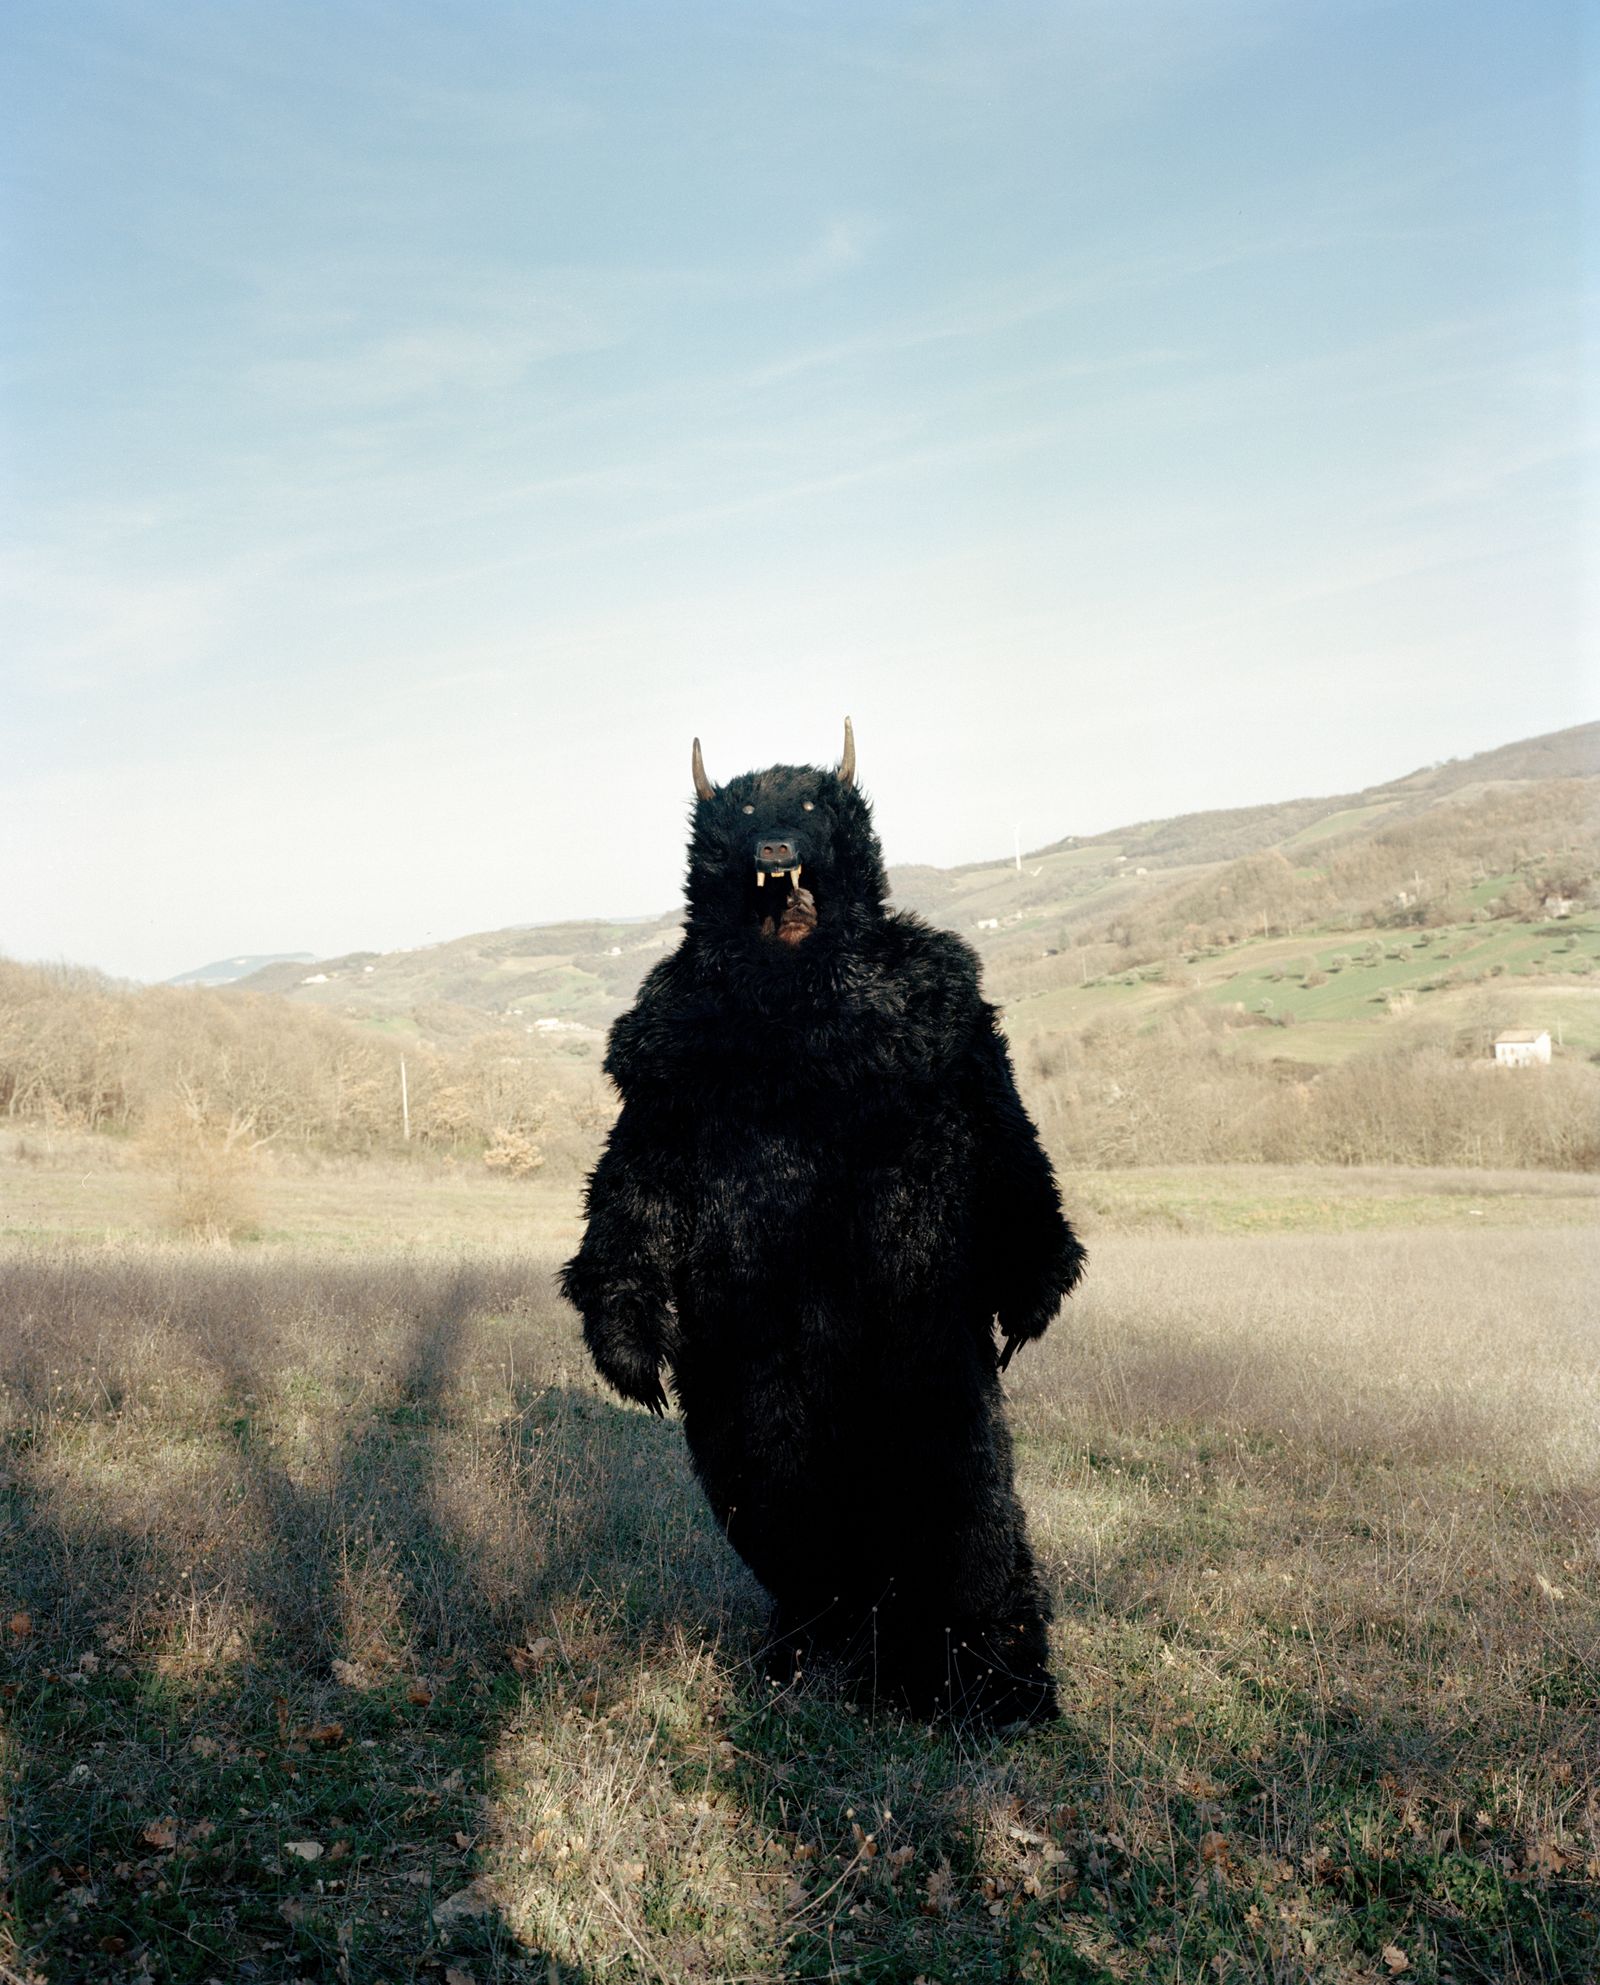 © Carlo Lombardi - Image from the La Carne Dell'Orso photography project